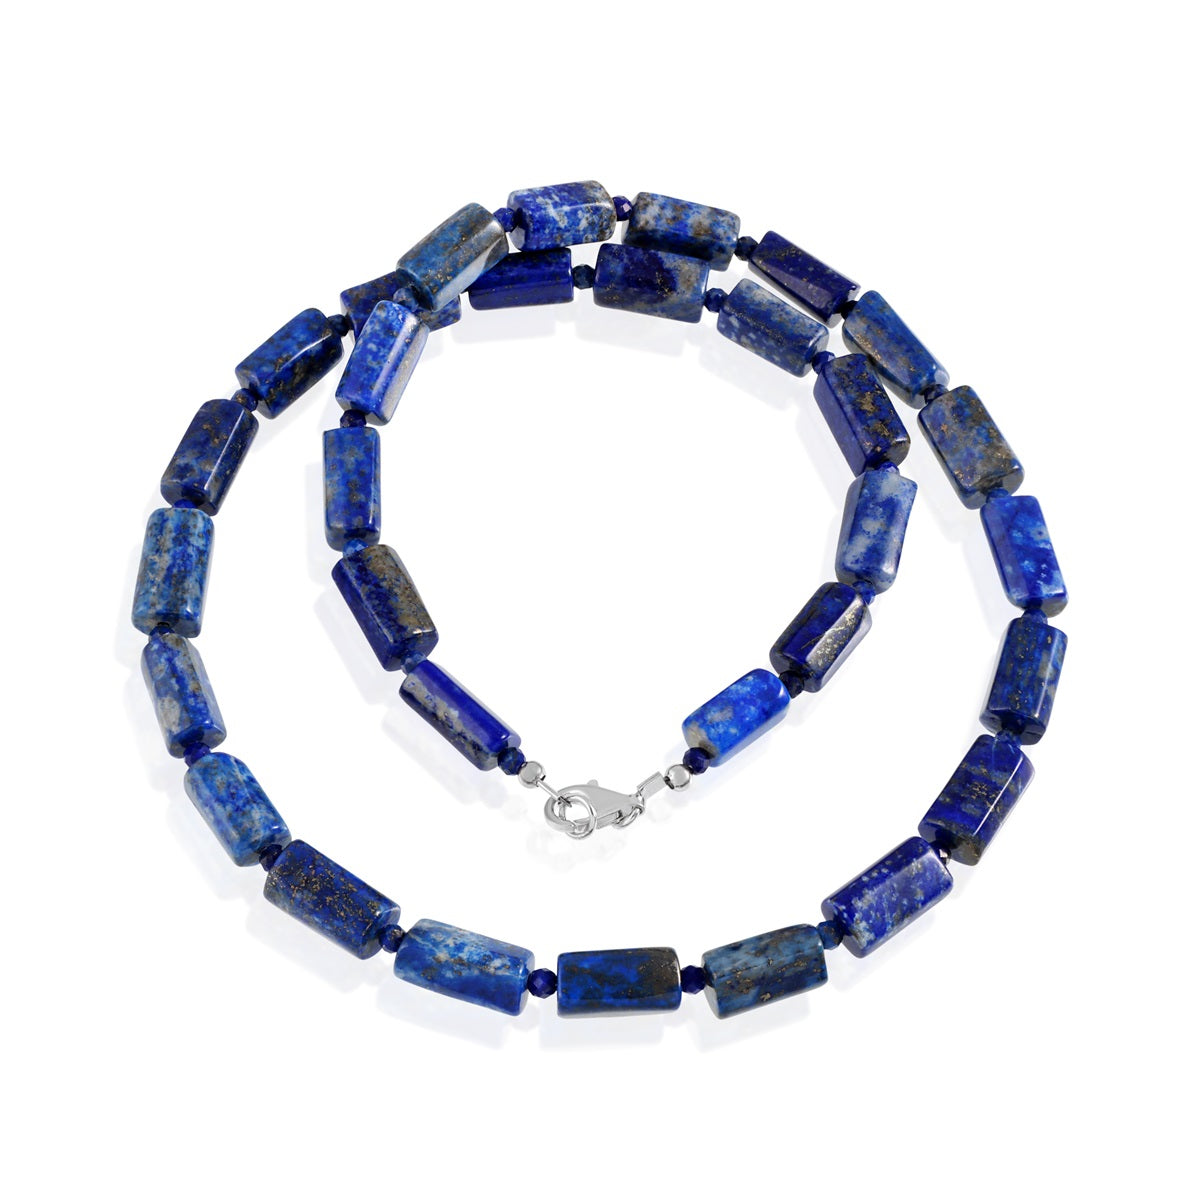 Lapis Lazuli Beads Silver Necklace: Wisdom and Serenity